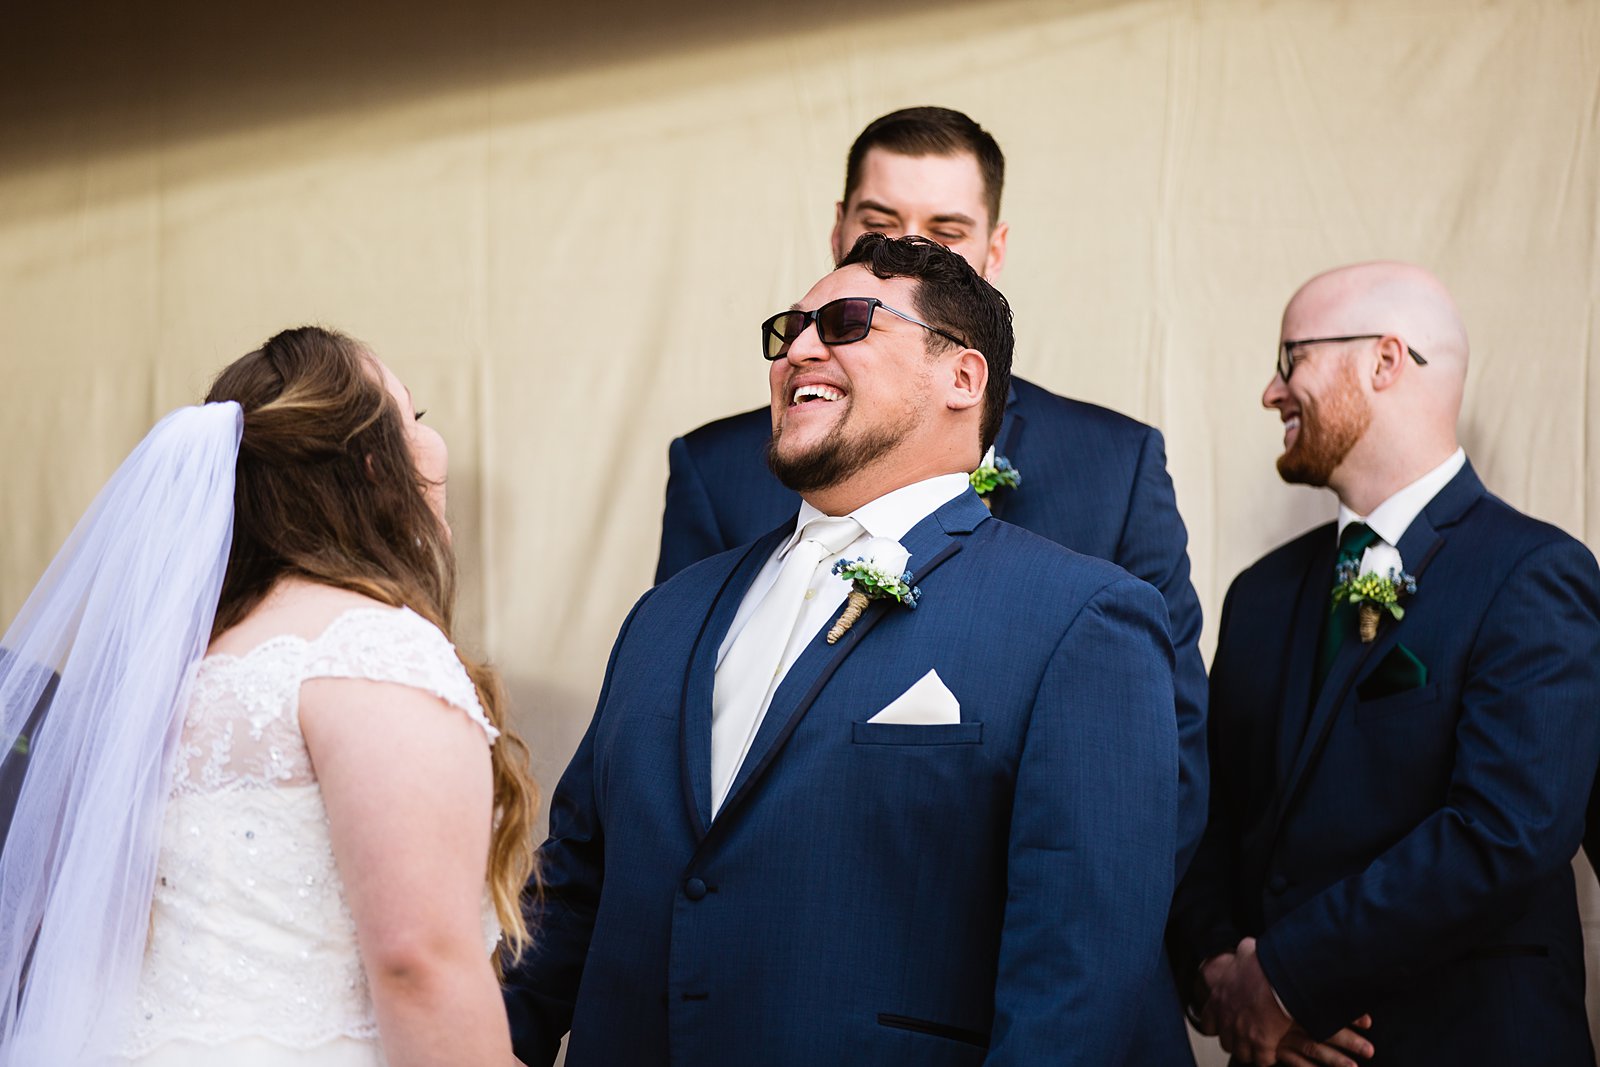 Groom laughing with his bride during their wedding ceremony at Backyard by Casa Grande wedding photographer PMA Photography.